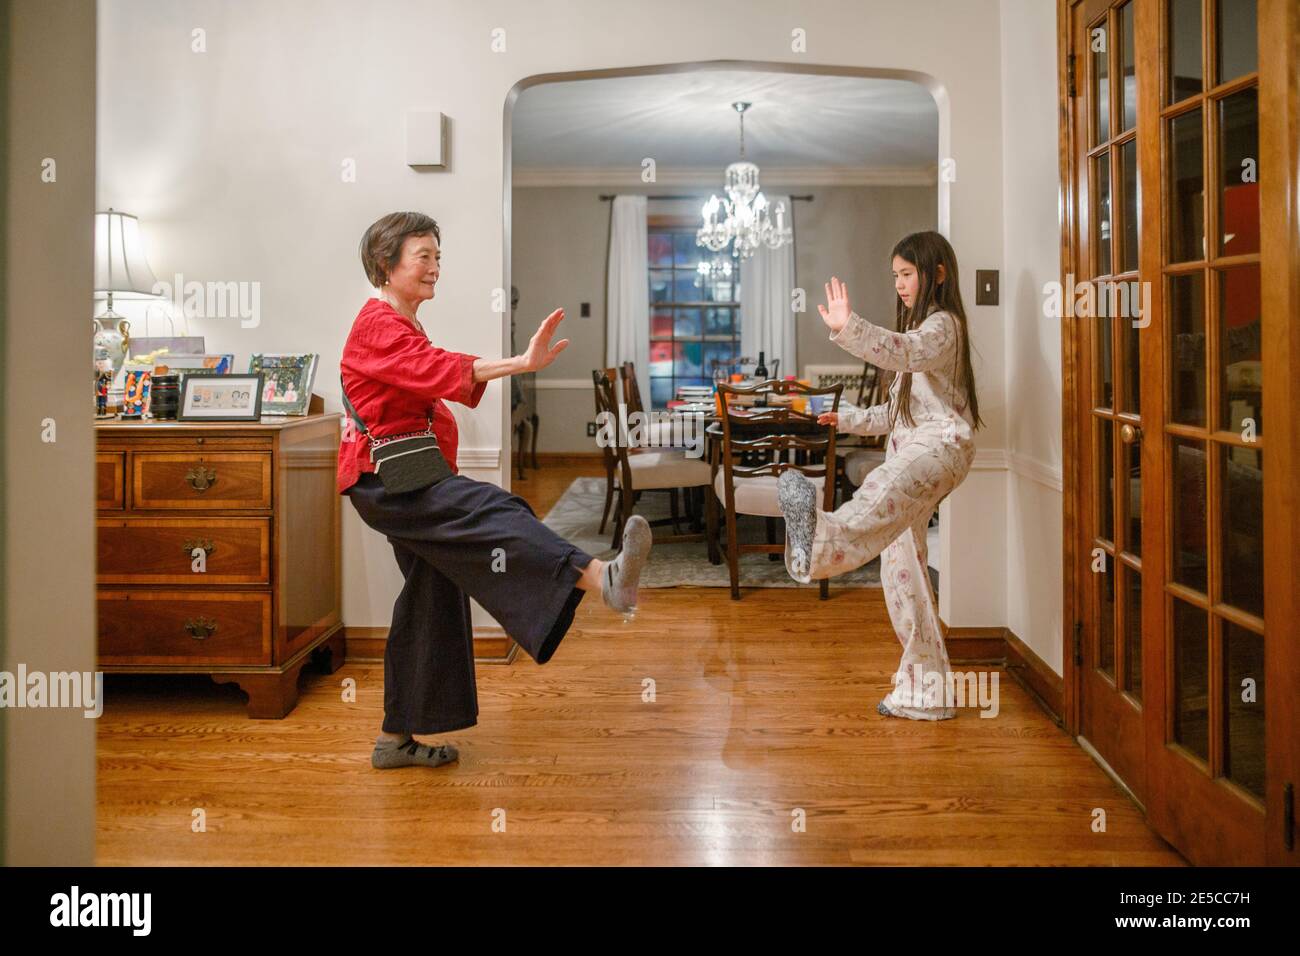 A grandmother teaches her tween granddaughter tai chi at home Stock Photo